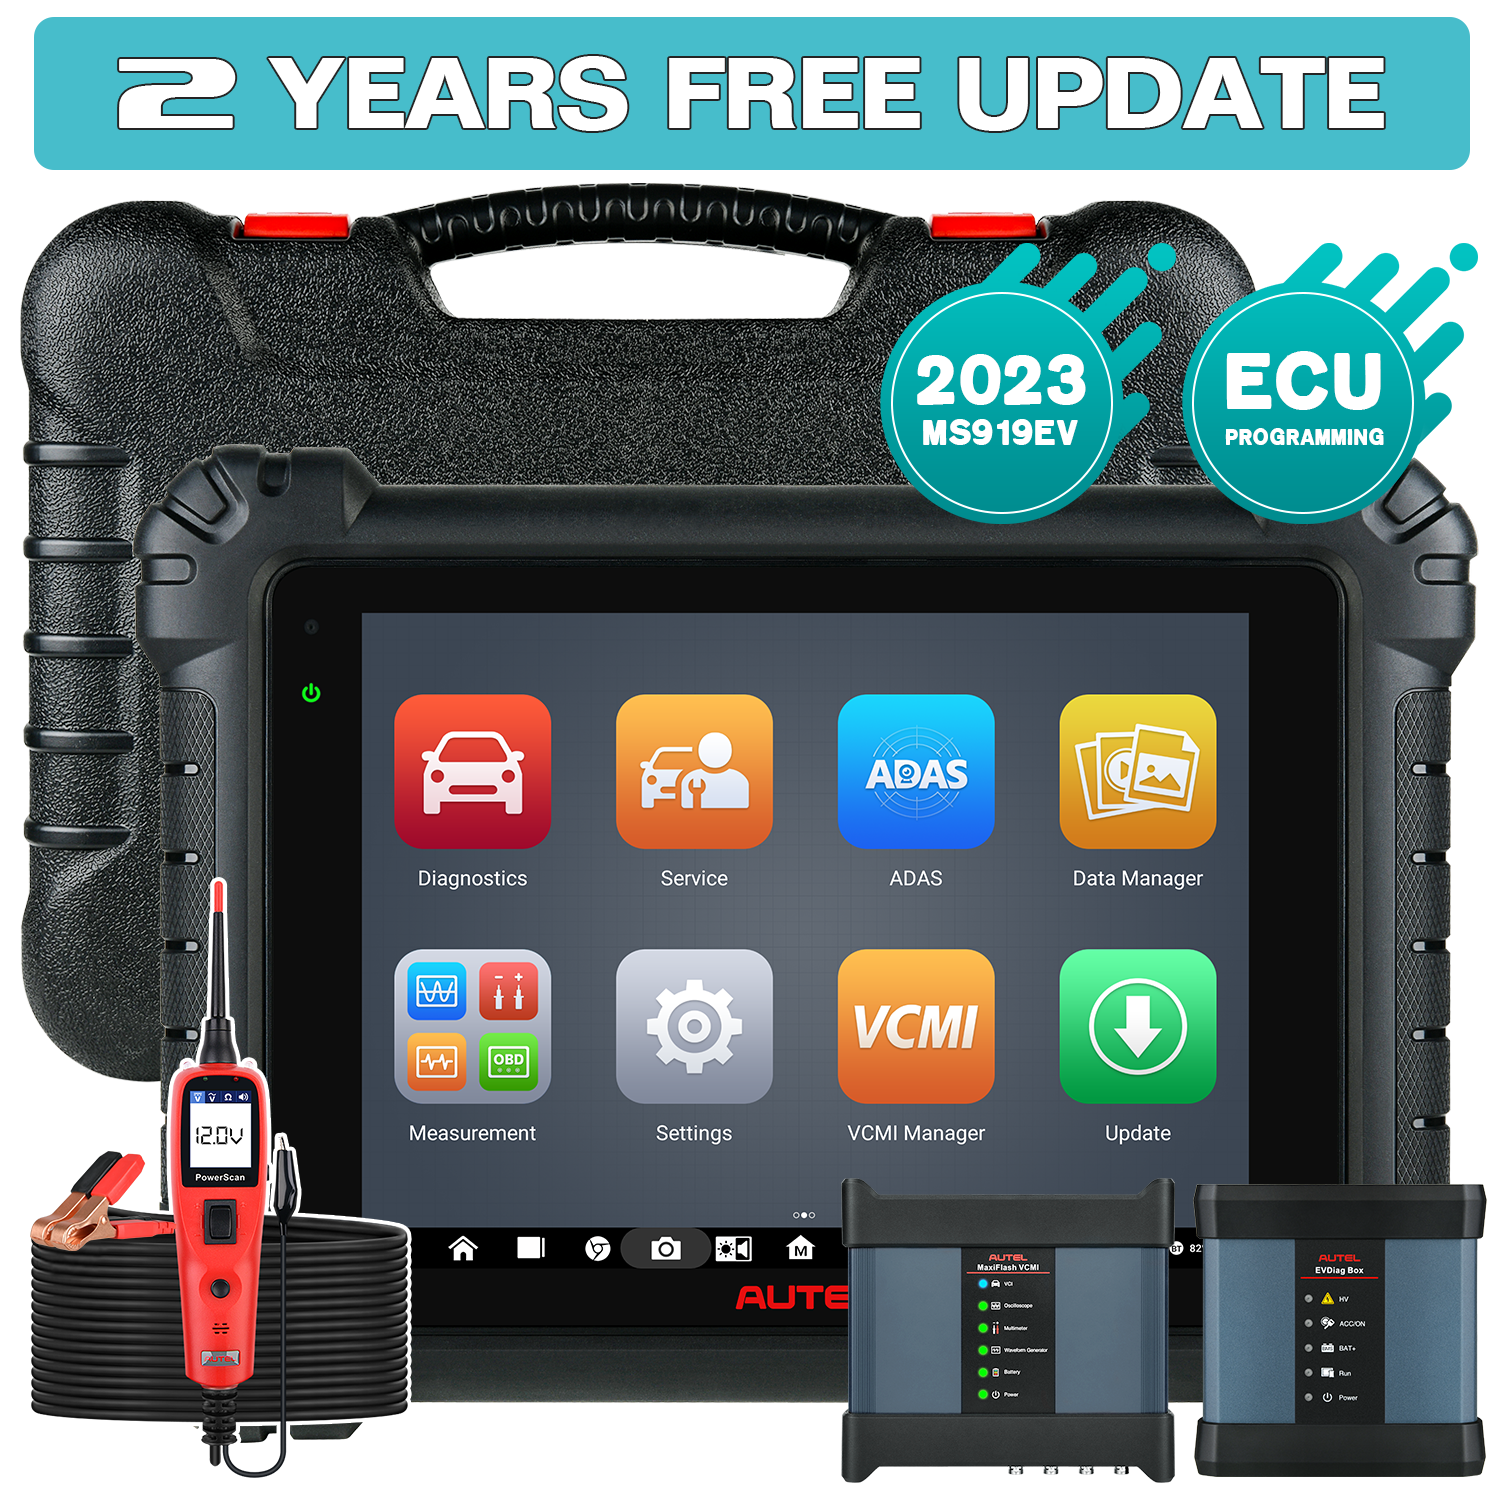 AUTEL Maxisys Ultra EV with 2 Years Free Updates